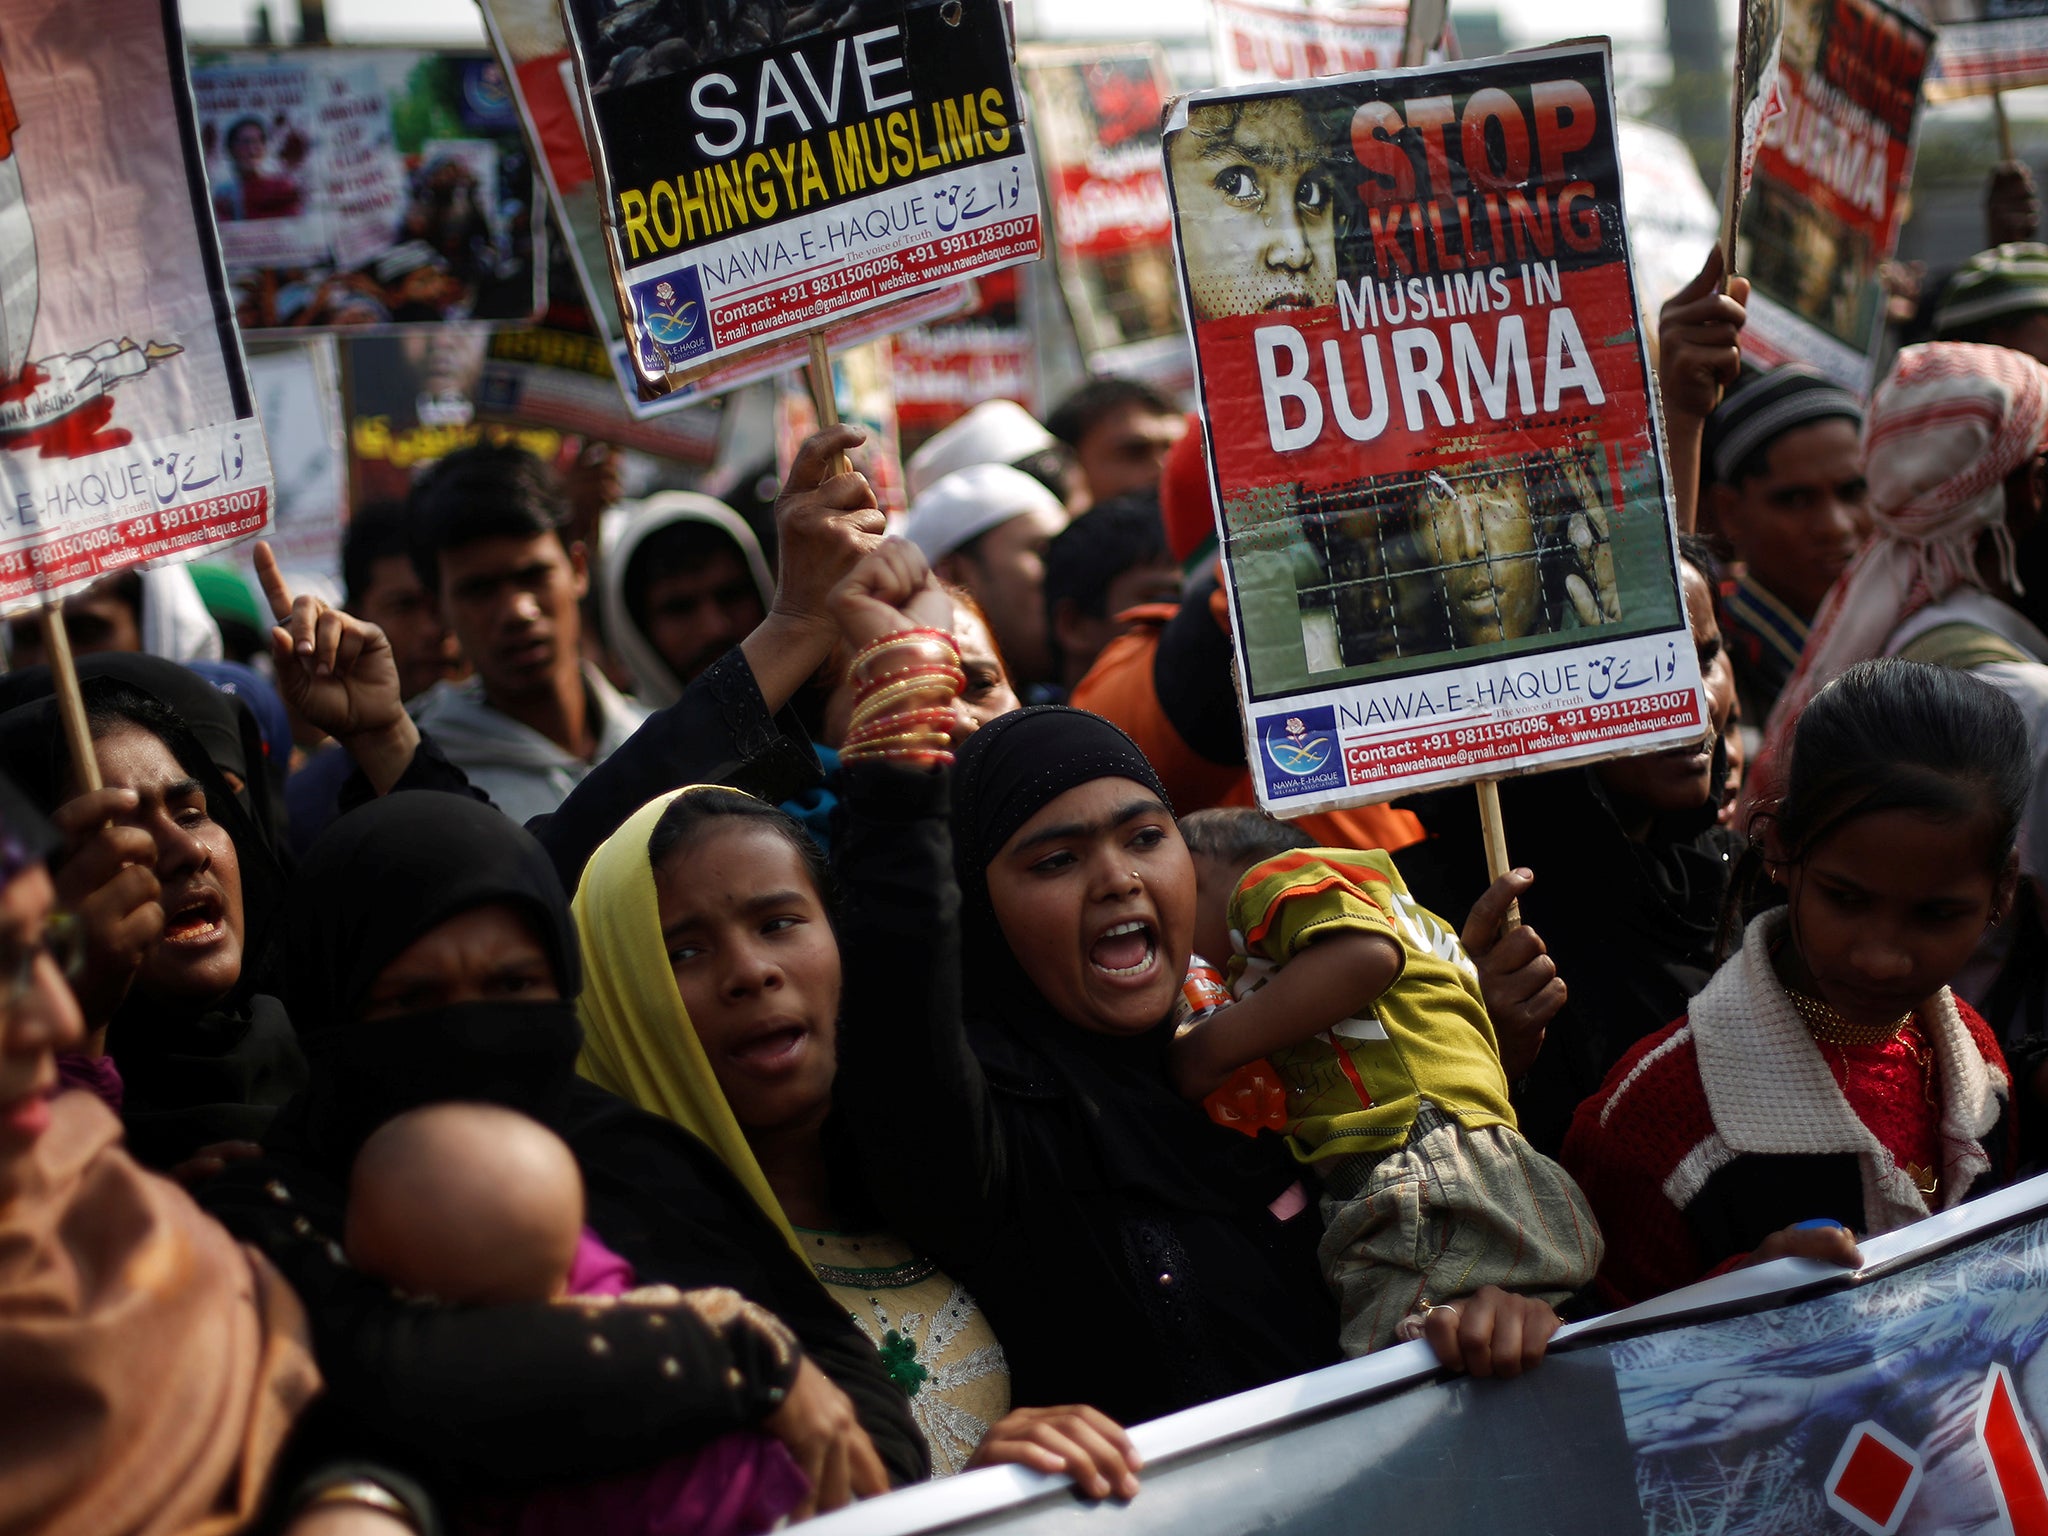 Rohingya Muslim refugees shout slogans during a protest against what organisers say is the crackdown on ethnic Rohingyas in Myanmar